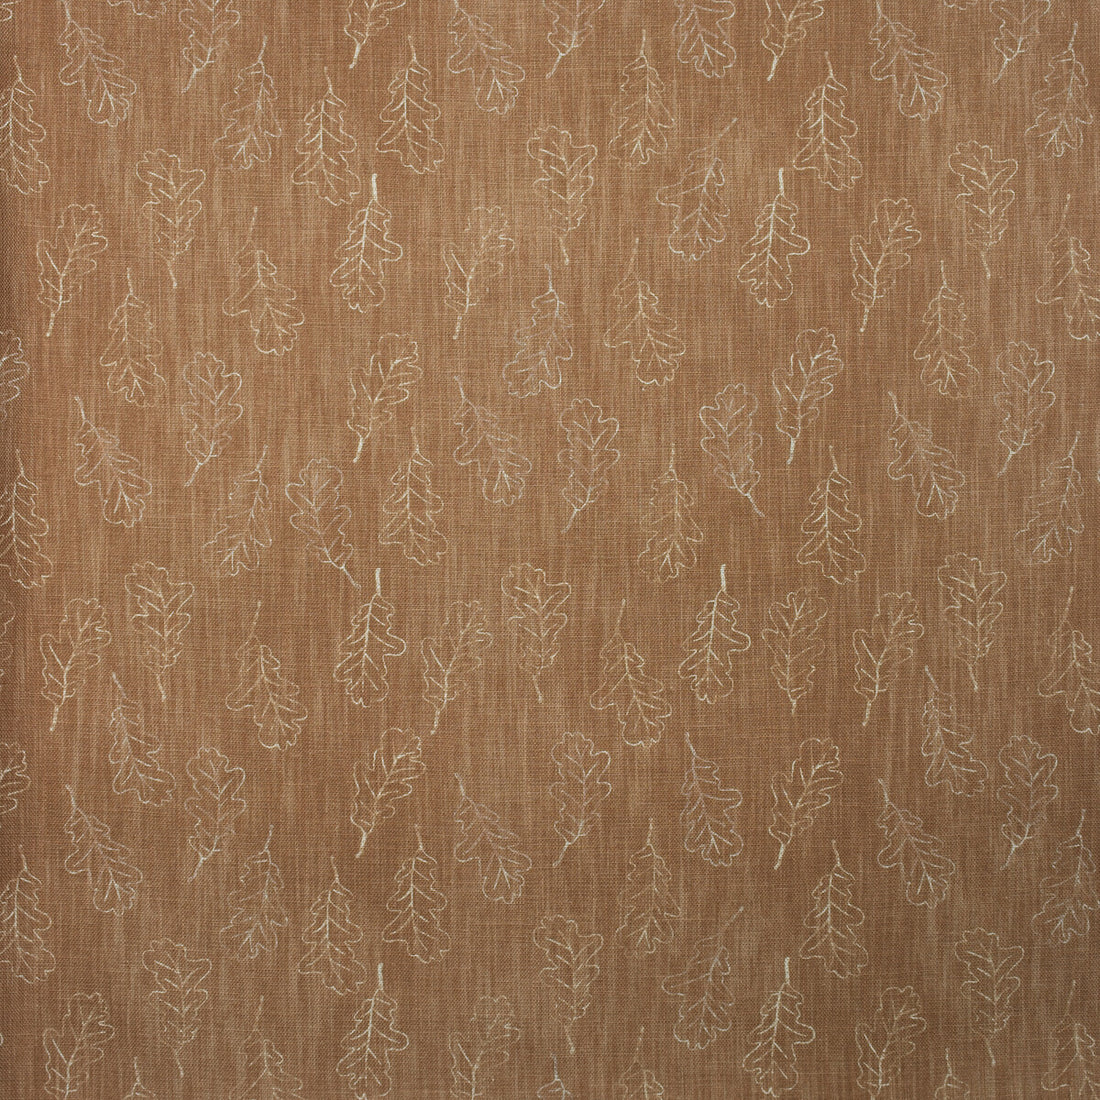 Noble Oak fabric in autumn color - pattern AM100398.624.0 - by Kravet Couture in the Andrew Martin Woodland By Sophie Paterson collection